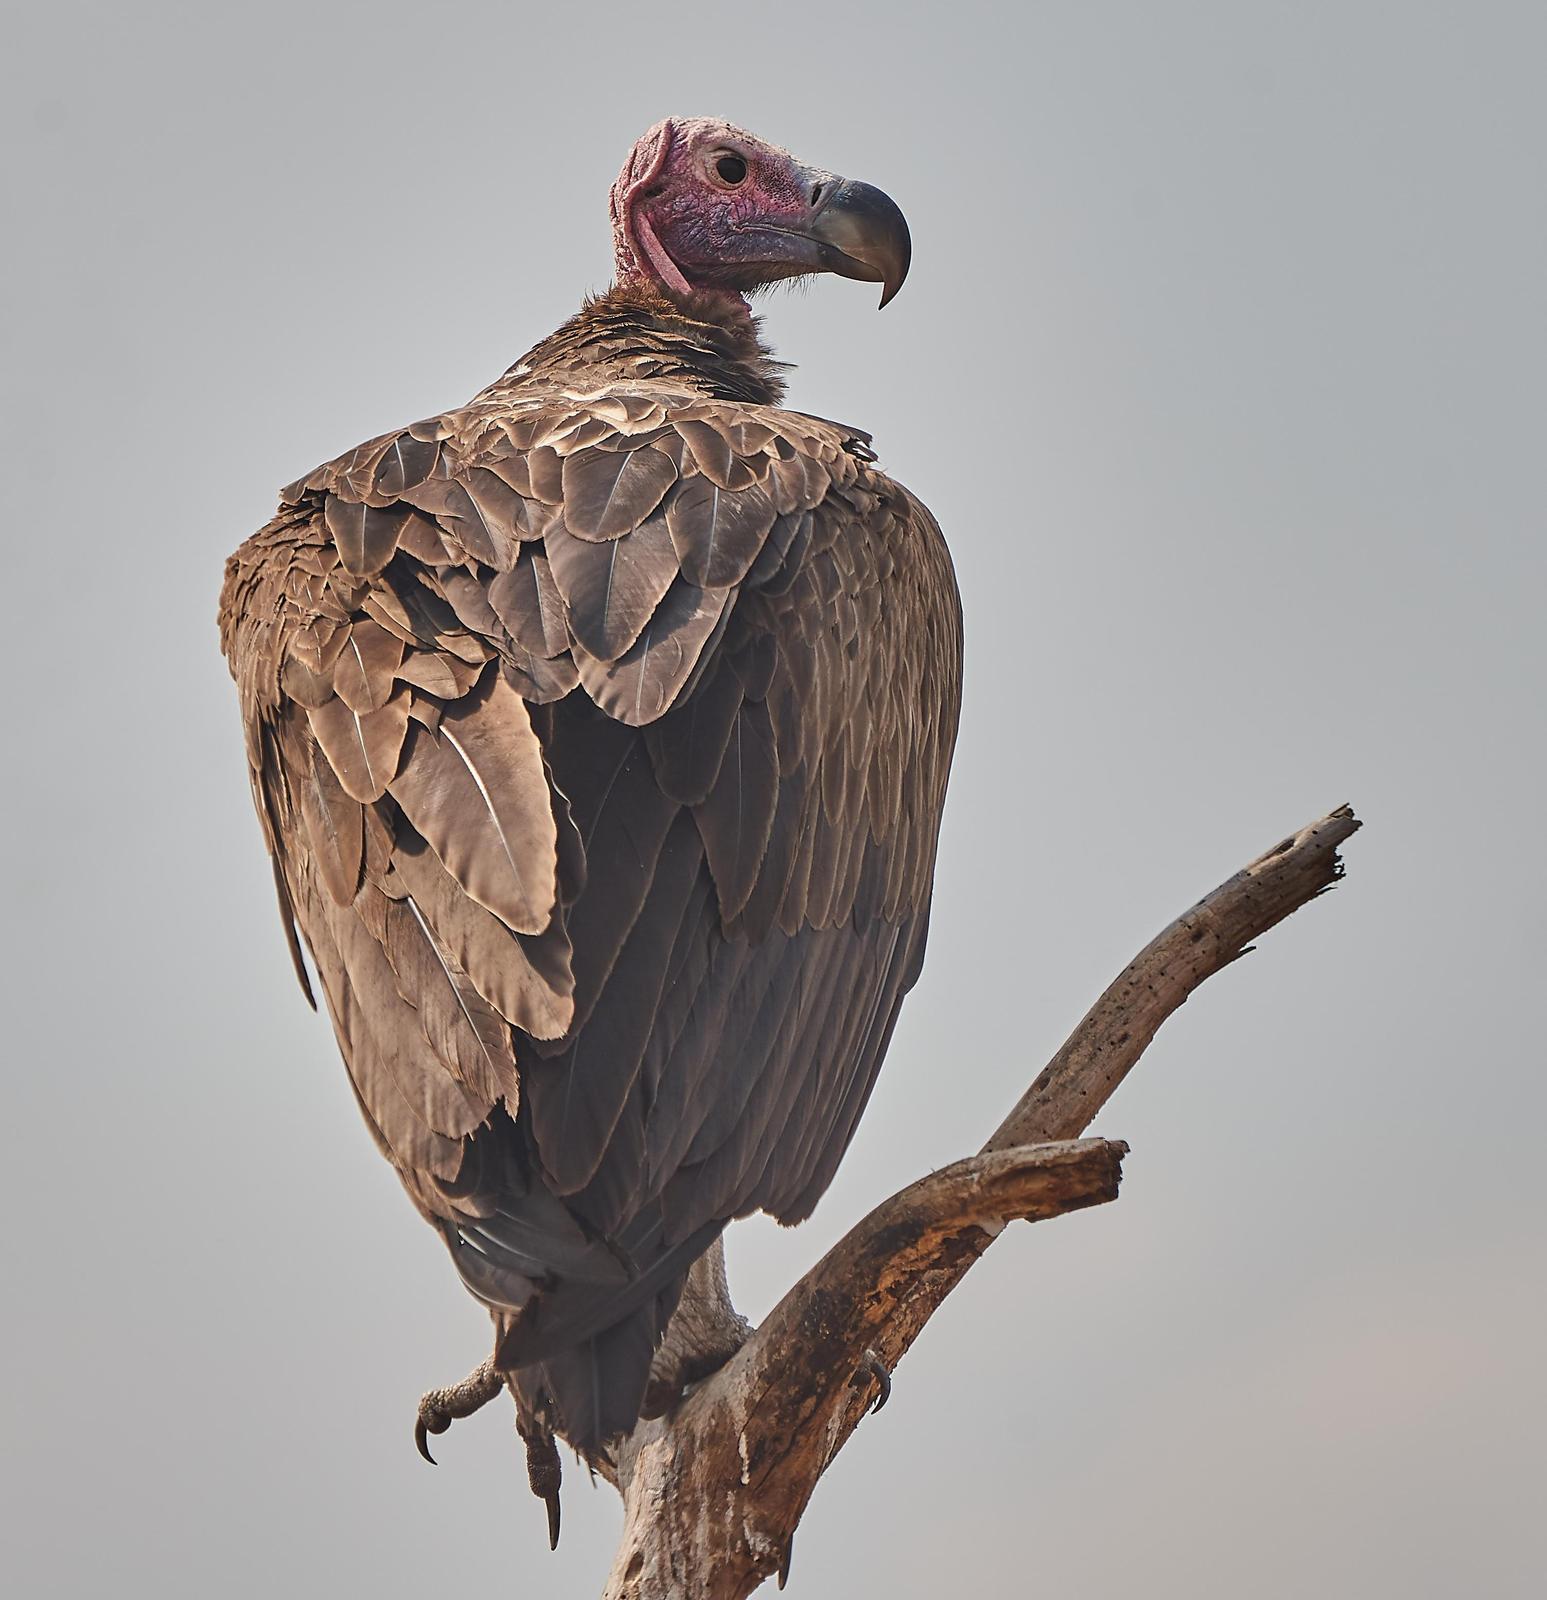 Lappet-faced Vulture Photo by Steven Cheong